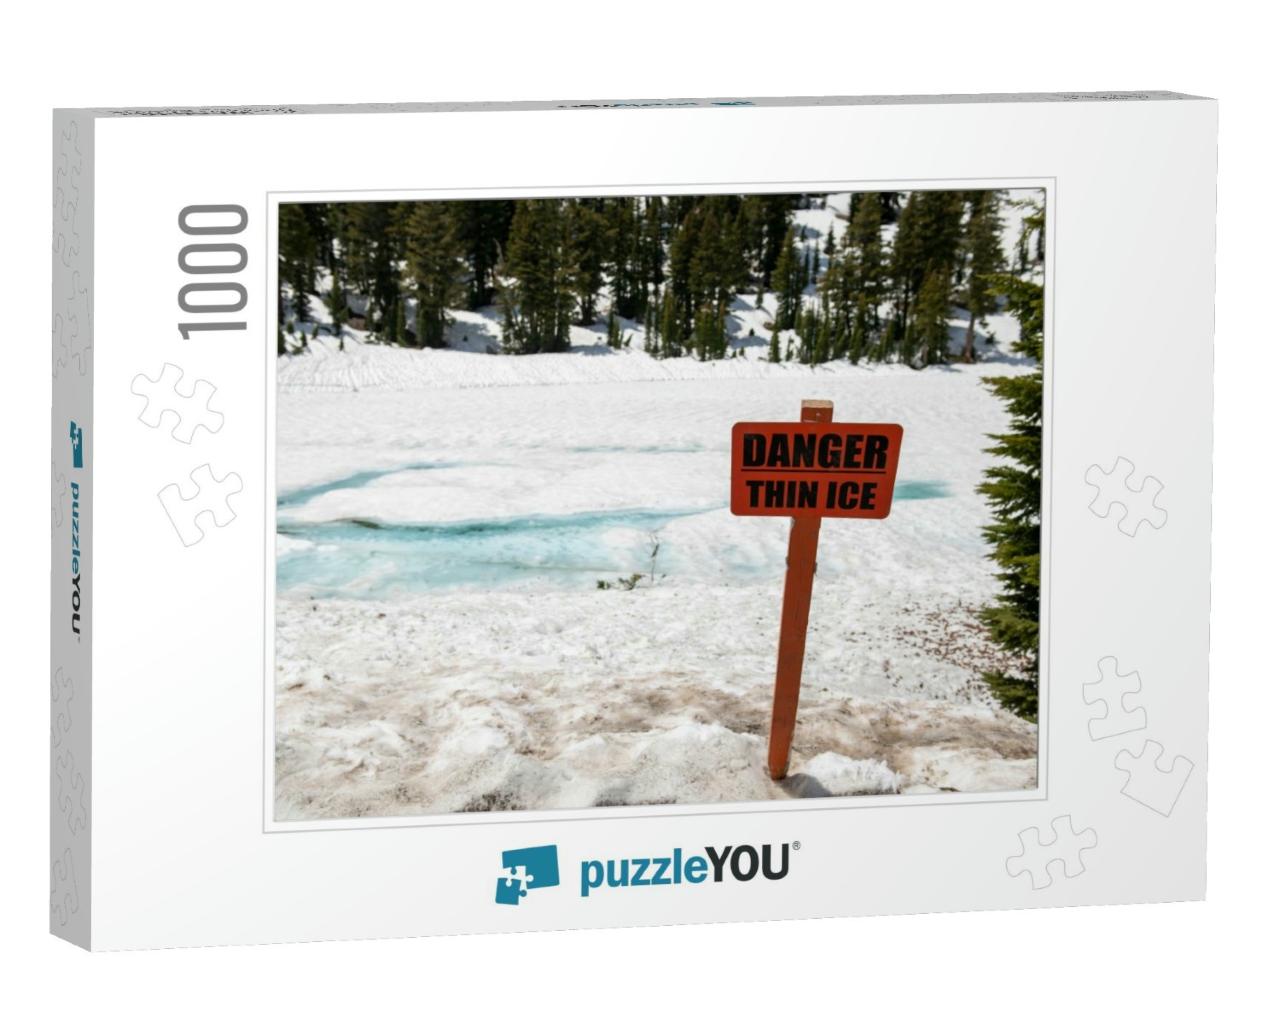 Danger Thin Ice Sign Next to a Frozen Pond in Lassen Nati... Jigsaw Puzzle with 1000 pieces